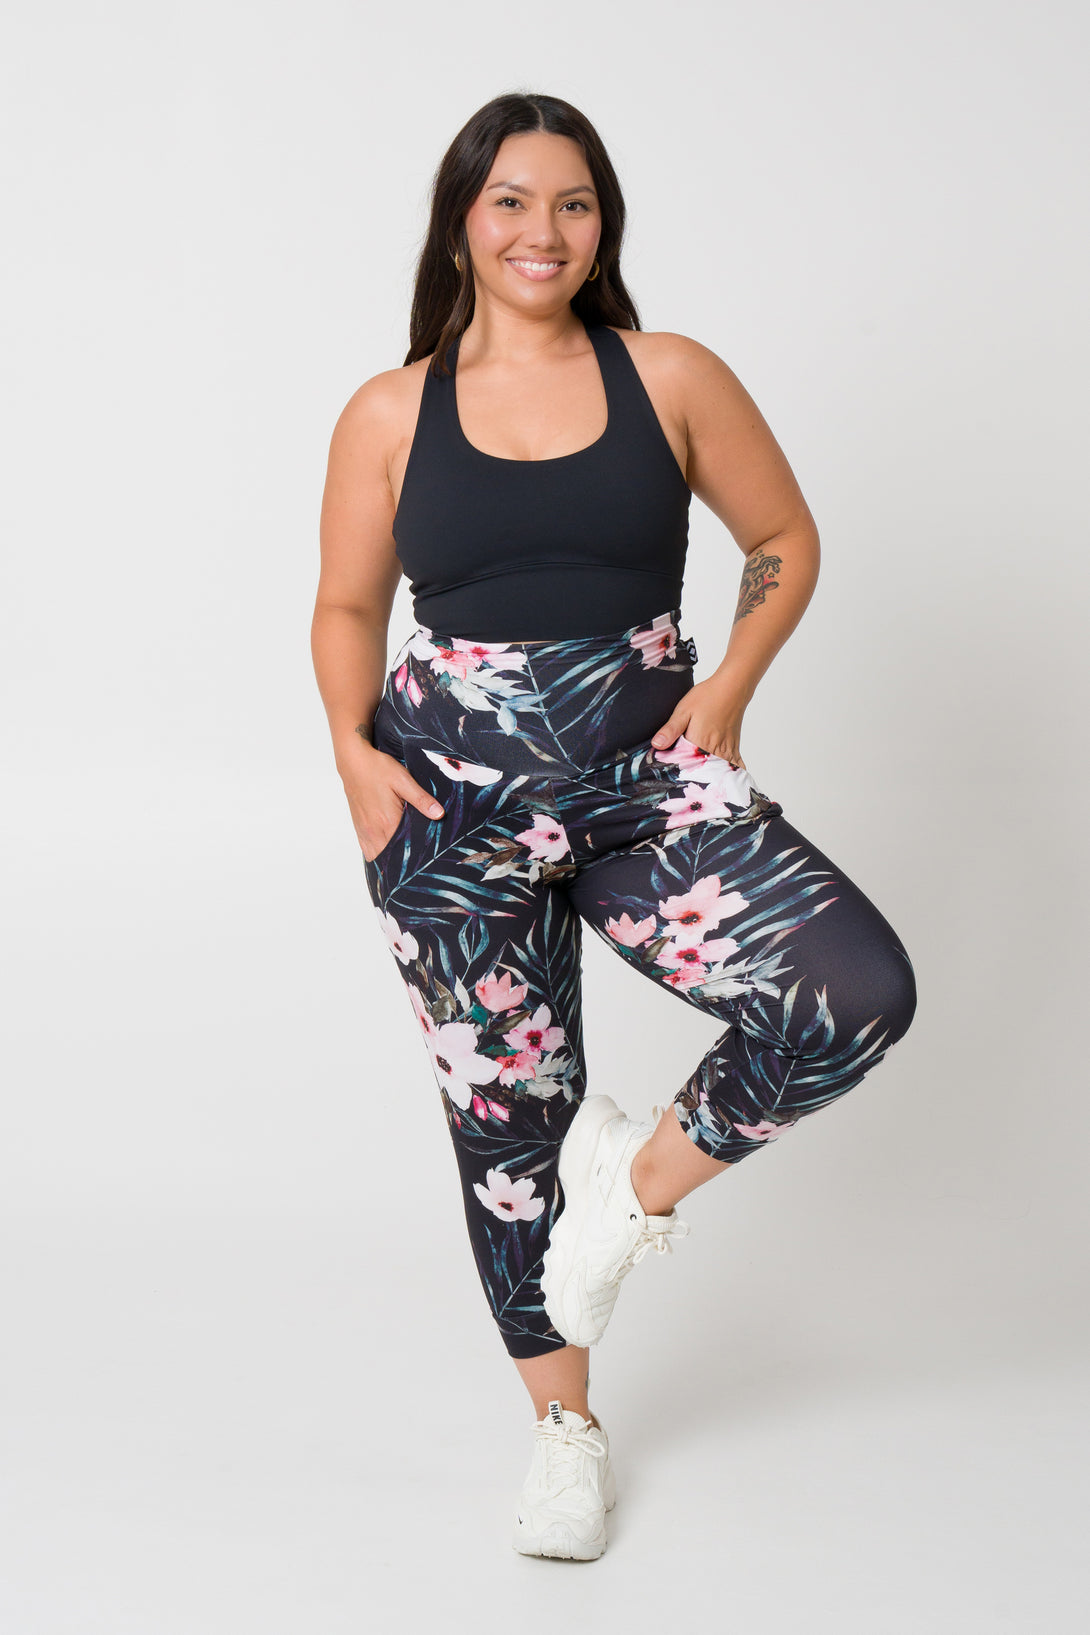 Exotic At Heart Soft to Touch - Jogger Capris w/ Pockets - Exoticathletica